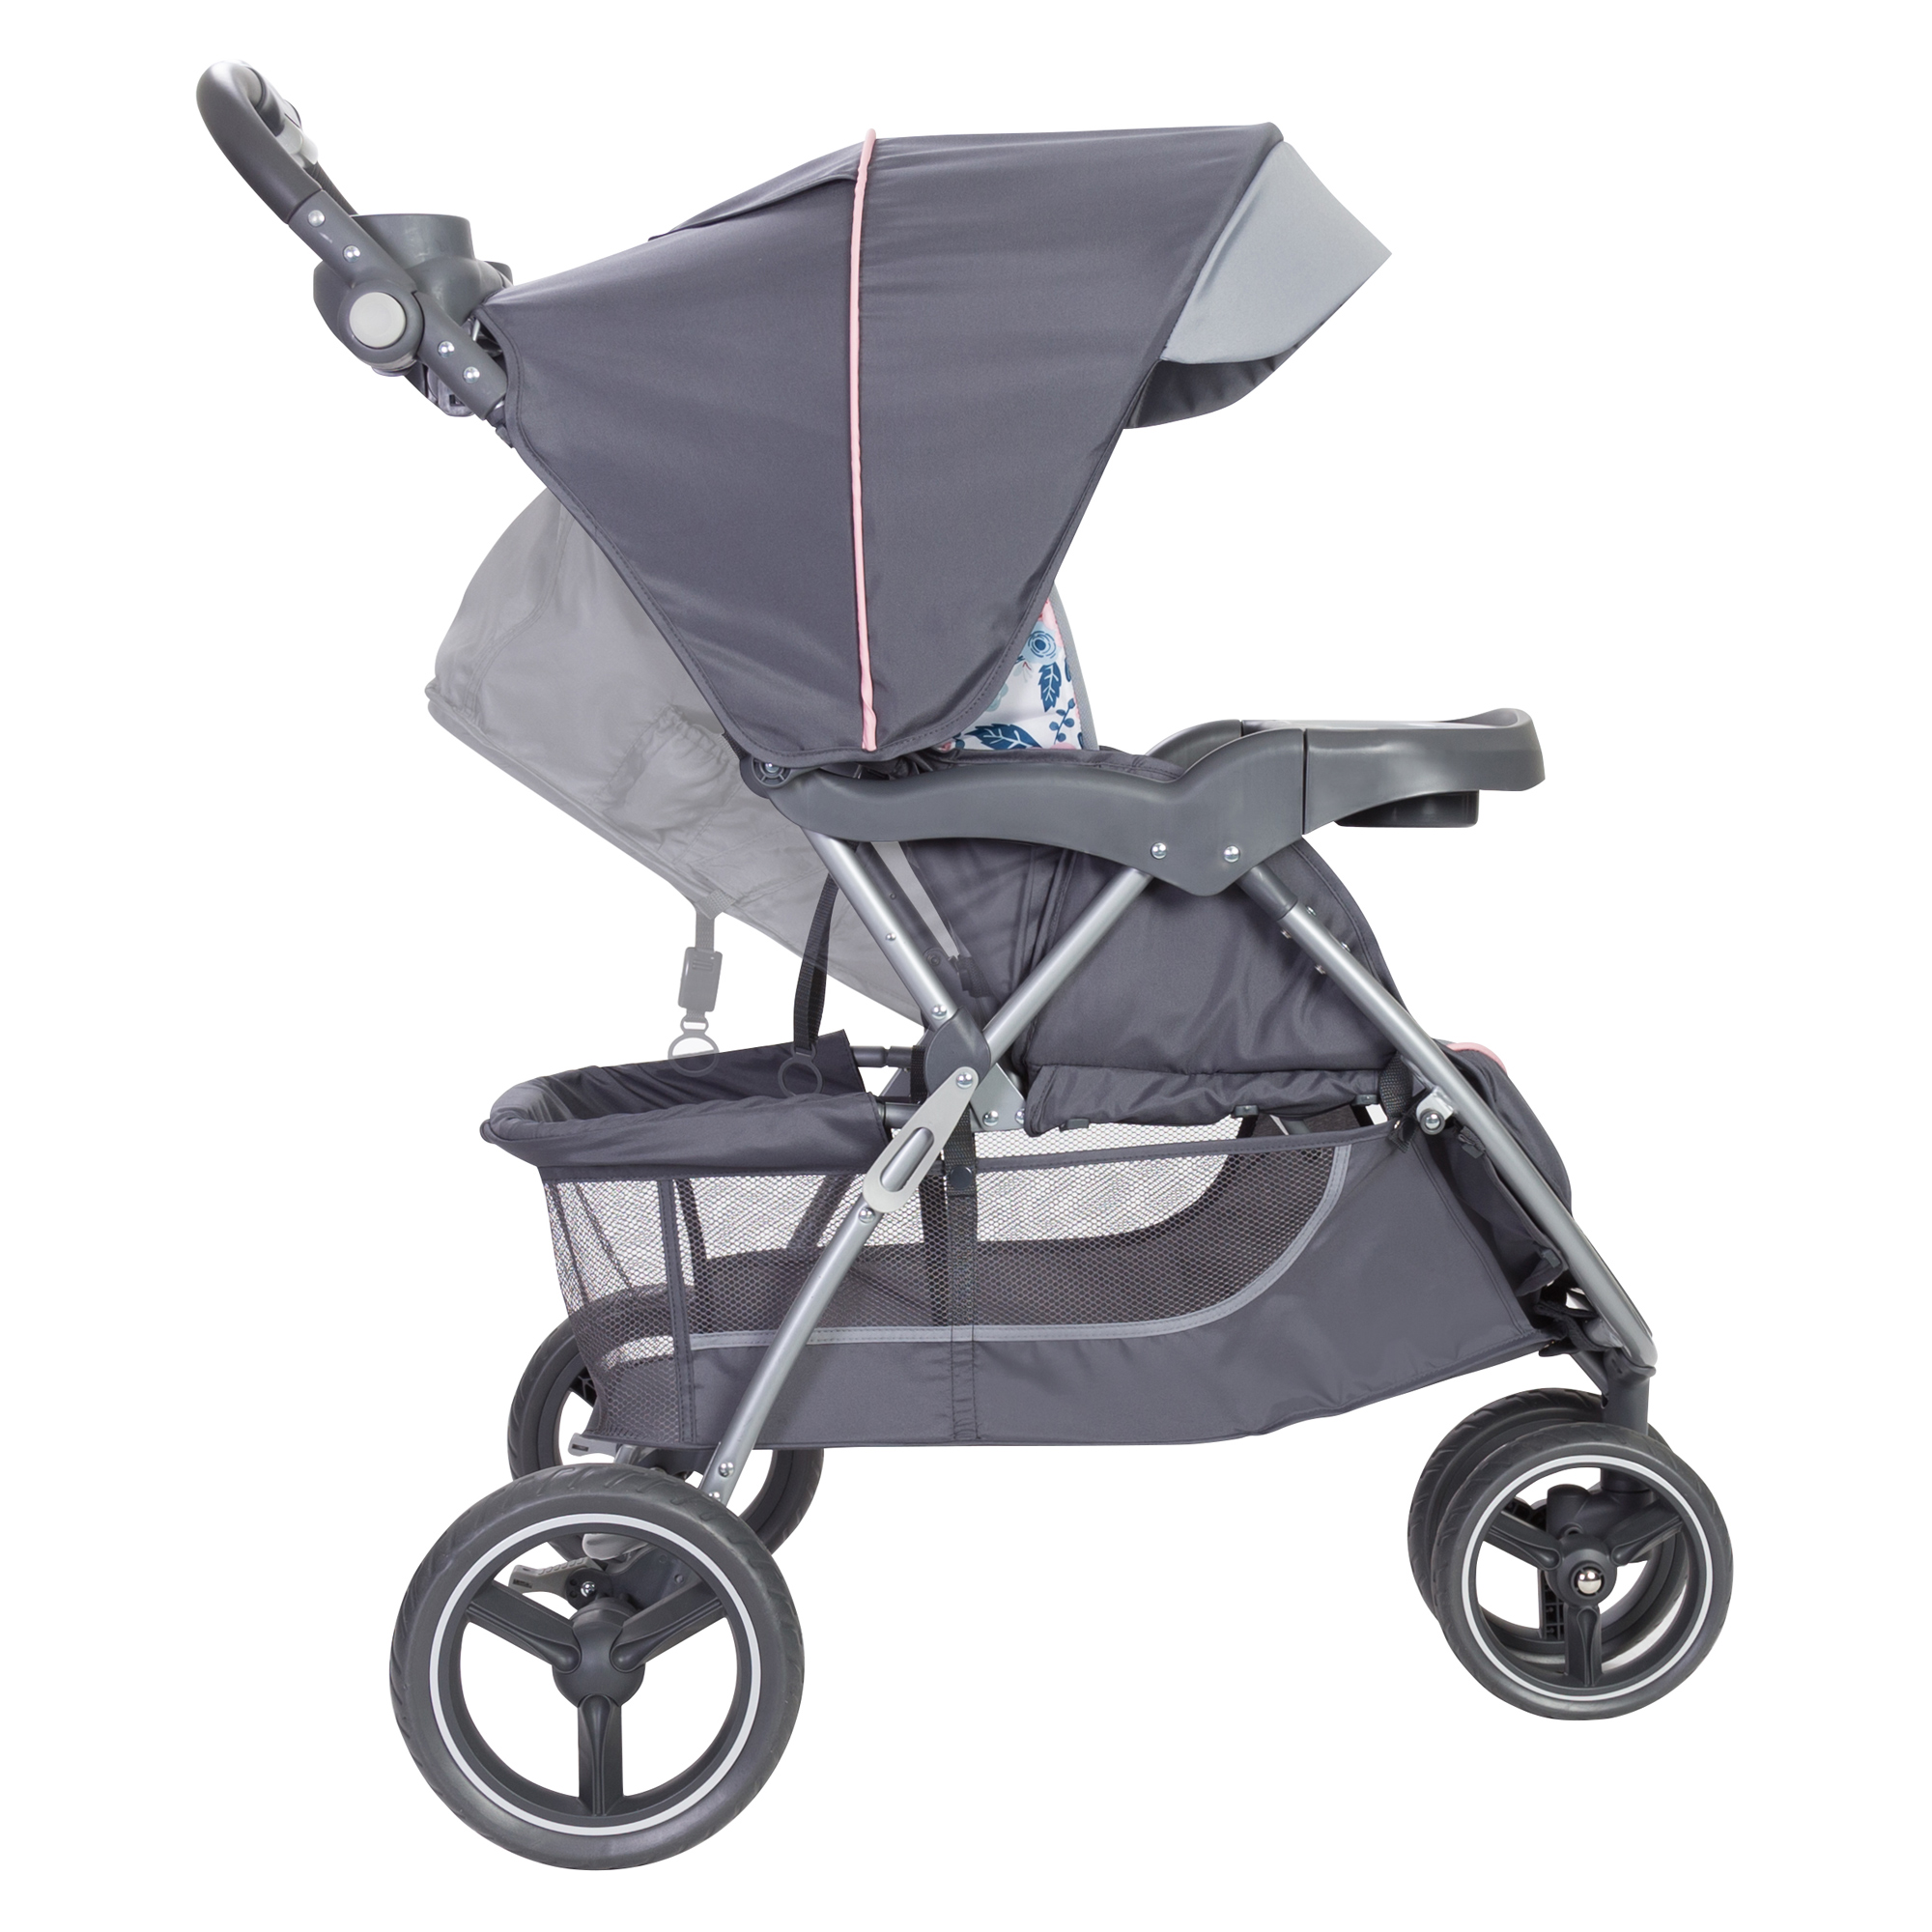 Baby Trend Skyview Plus Travel System - Bluebell - image 5 of 7